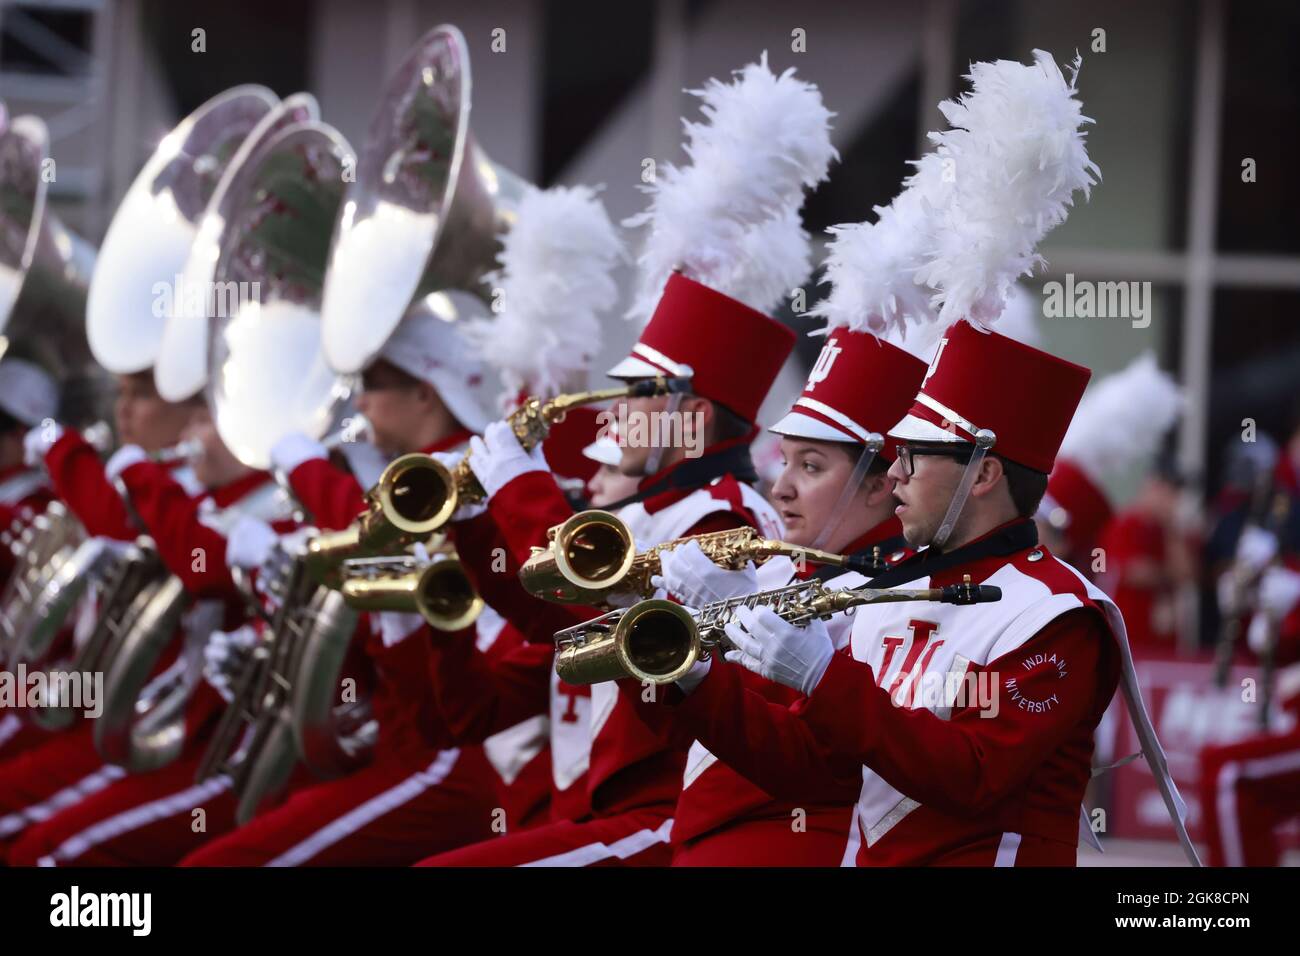 BLOOMINGTON, UNITED STATES - 2021/09/11: Marching 100 marching band plays on the field before Indiana University's plays against Idaho during an NCAA football game on September 11, 2021 at Memorial Stadium in Bloomington, Ind. The Hoosiers beat the Vandals 56-14. Stock Photo